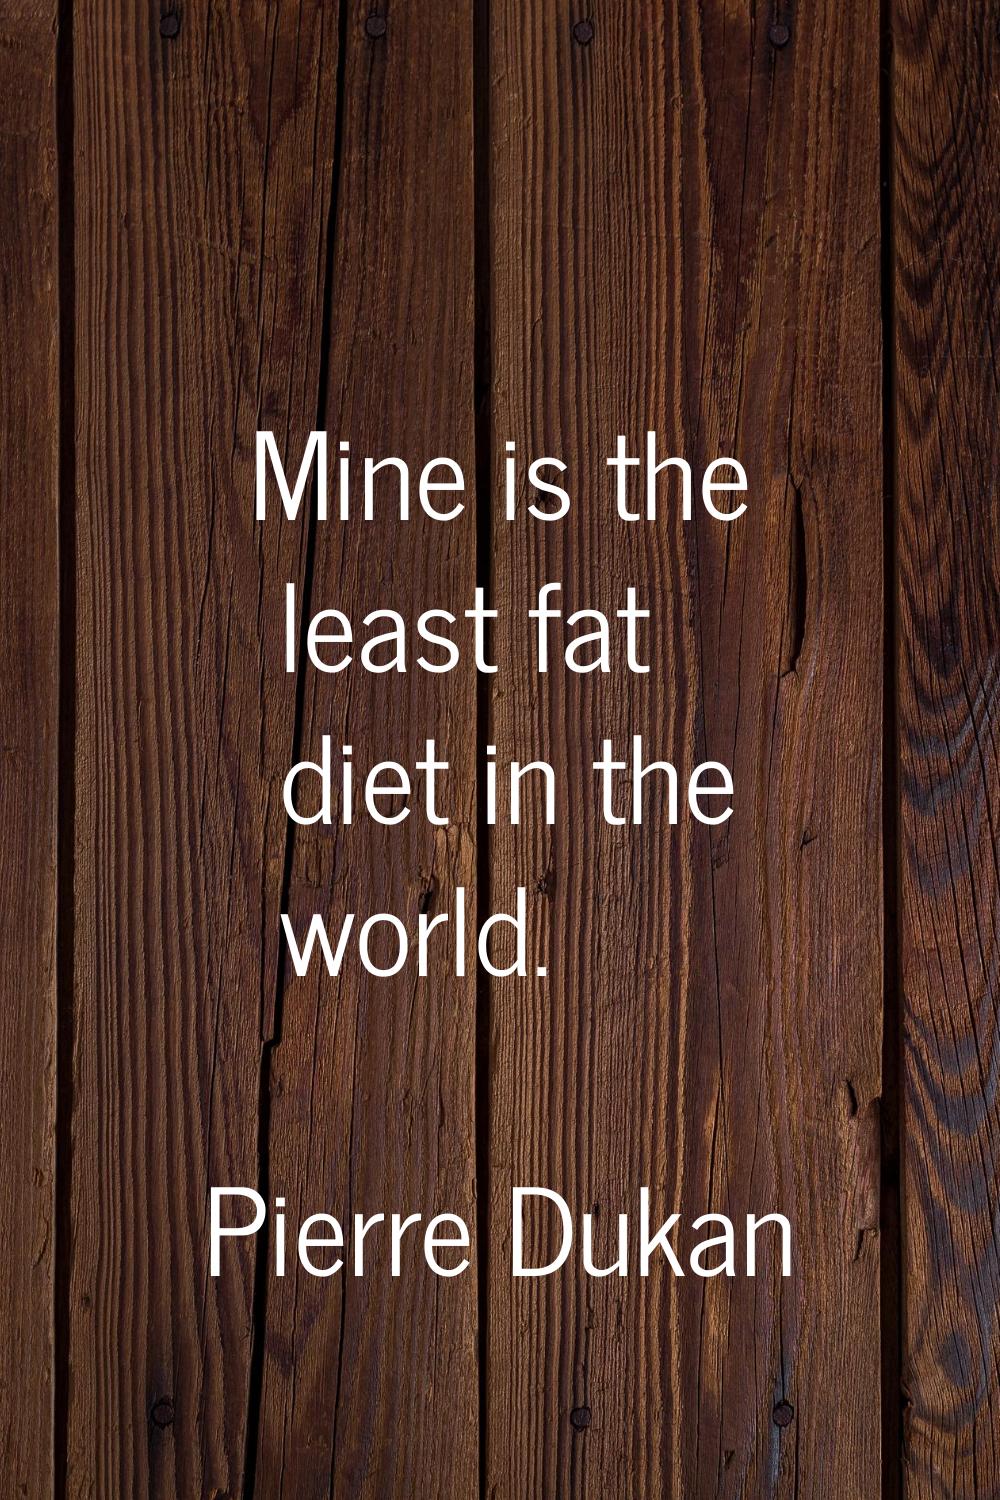 Mine is the least fat diet in the world.